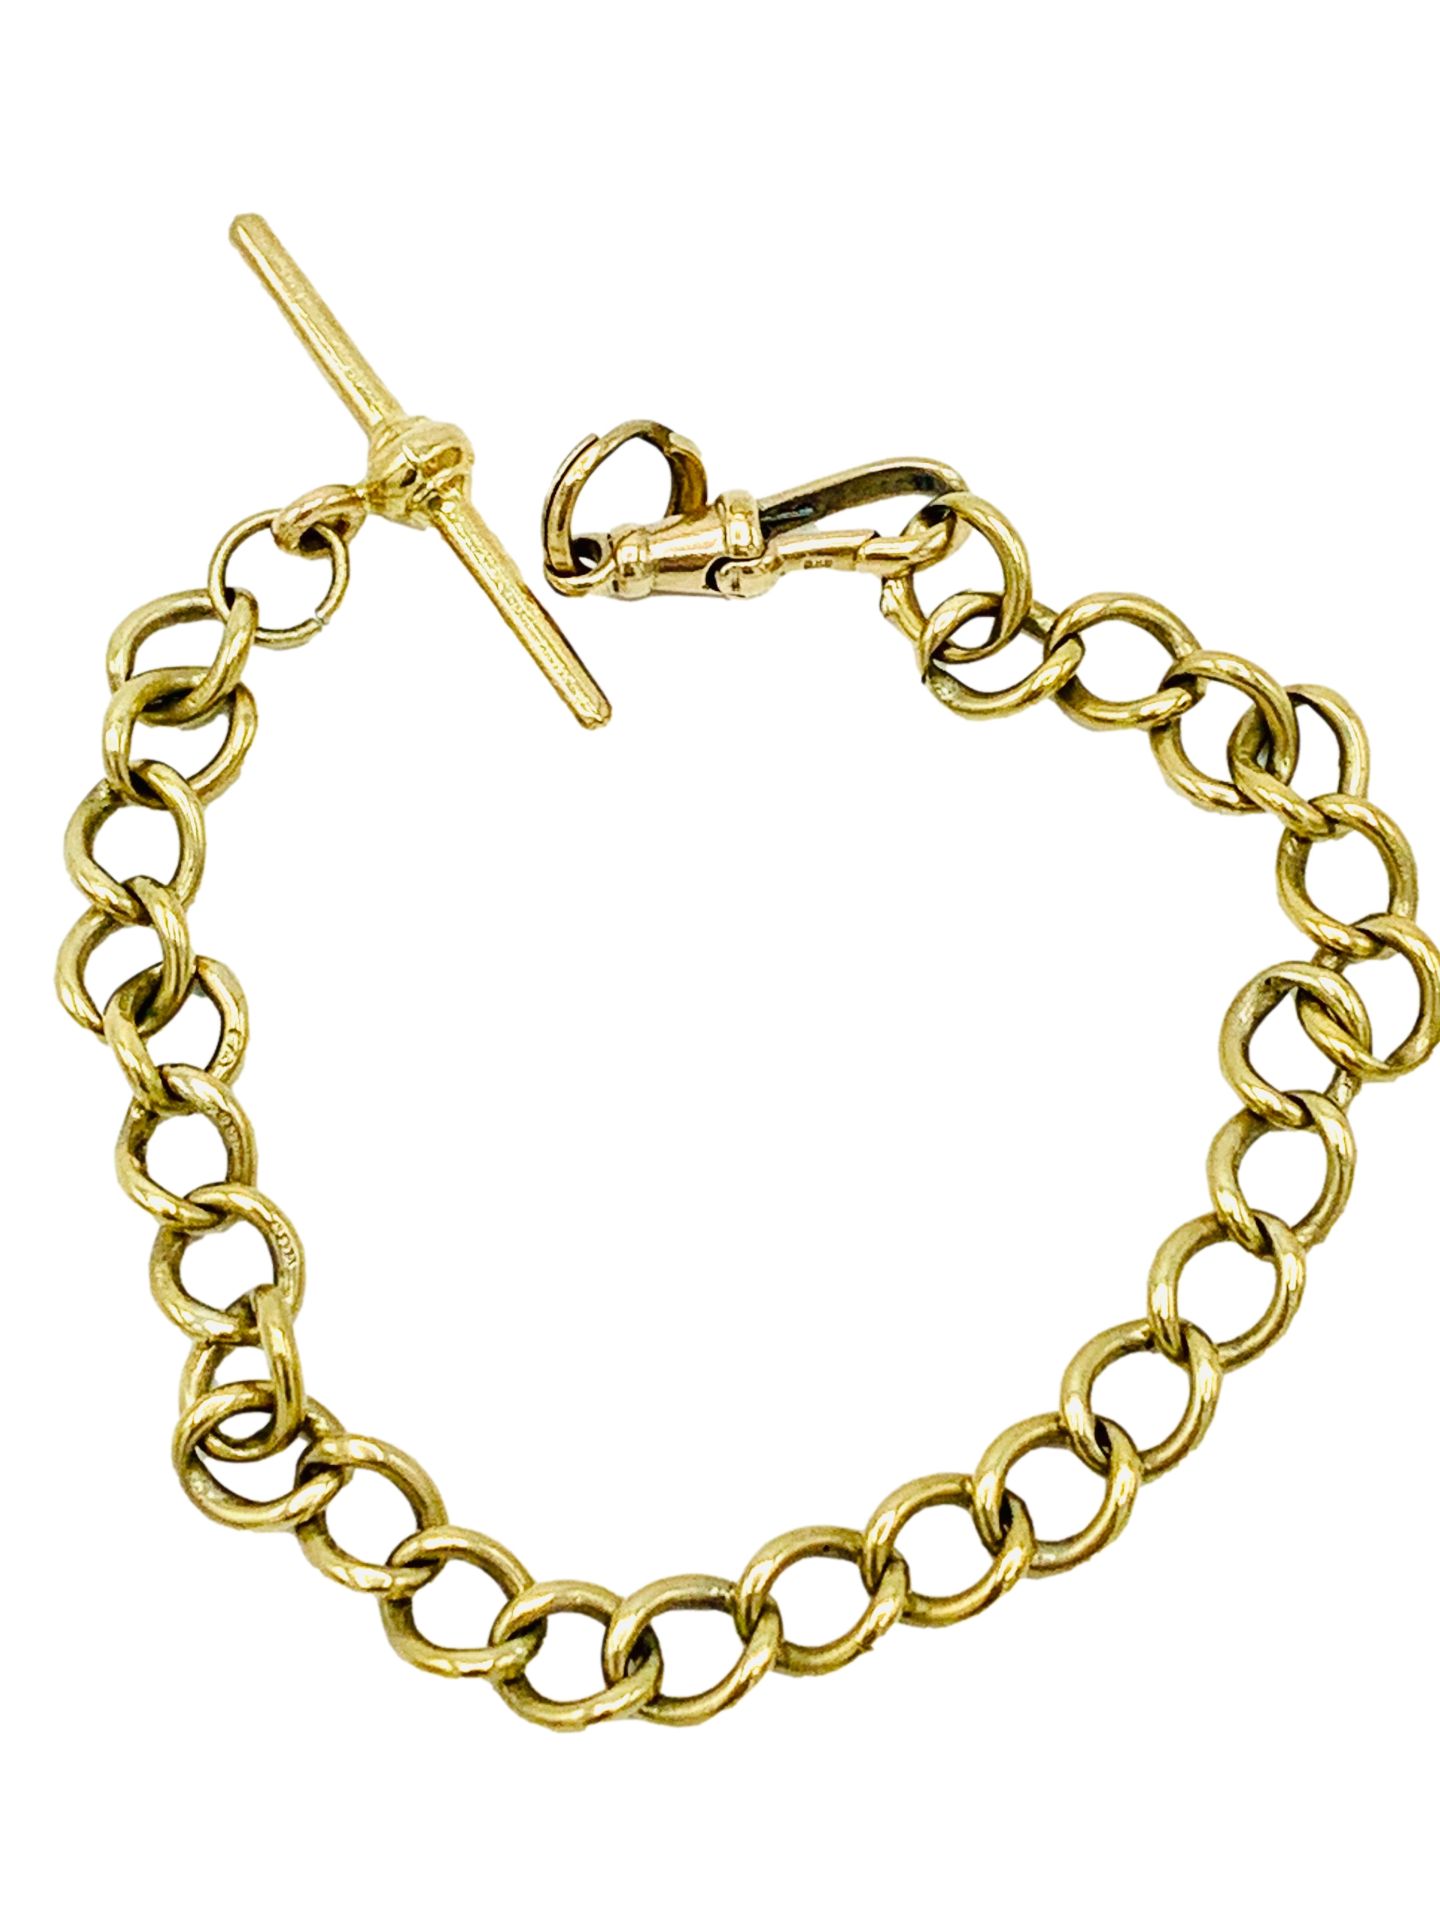 9ct gold fob chain. - Image 2 of 5